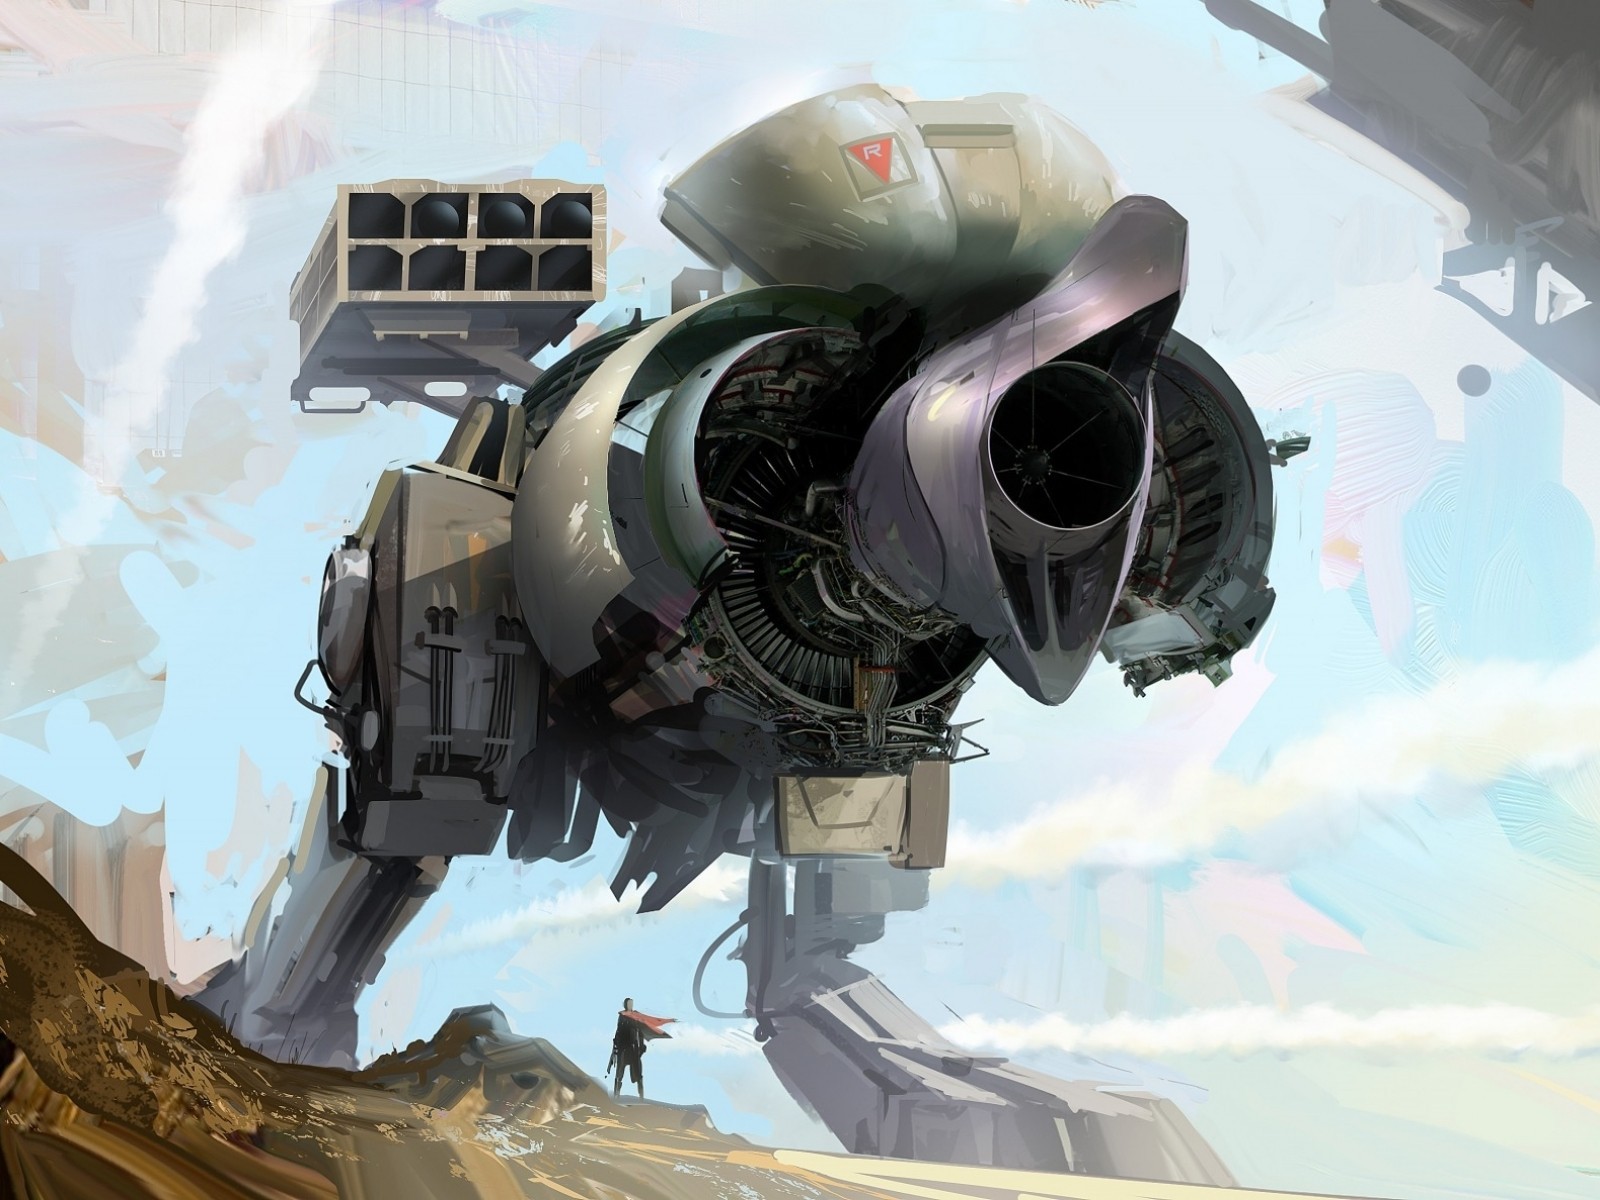 General 1600x1200 vehicle science fiction artwork